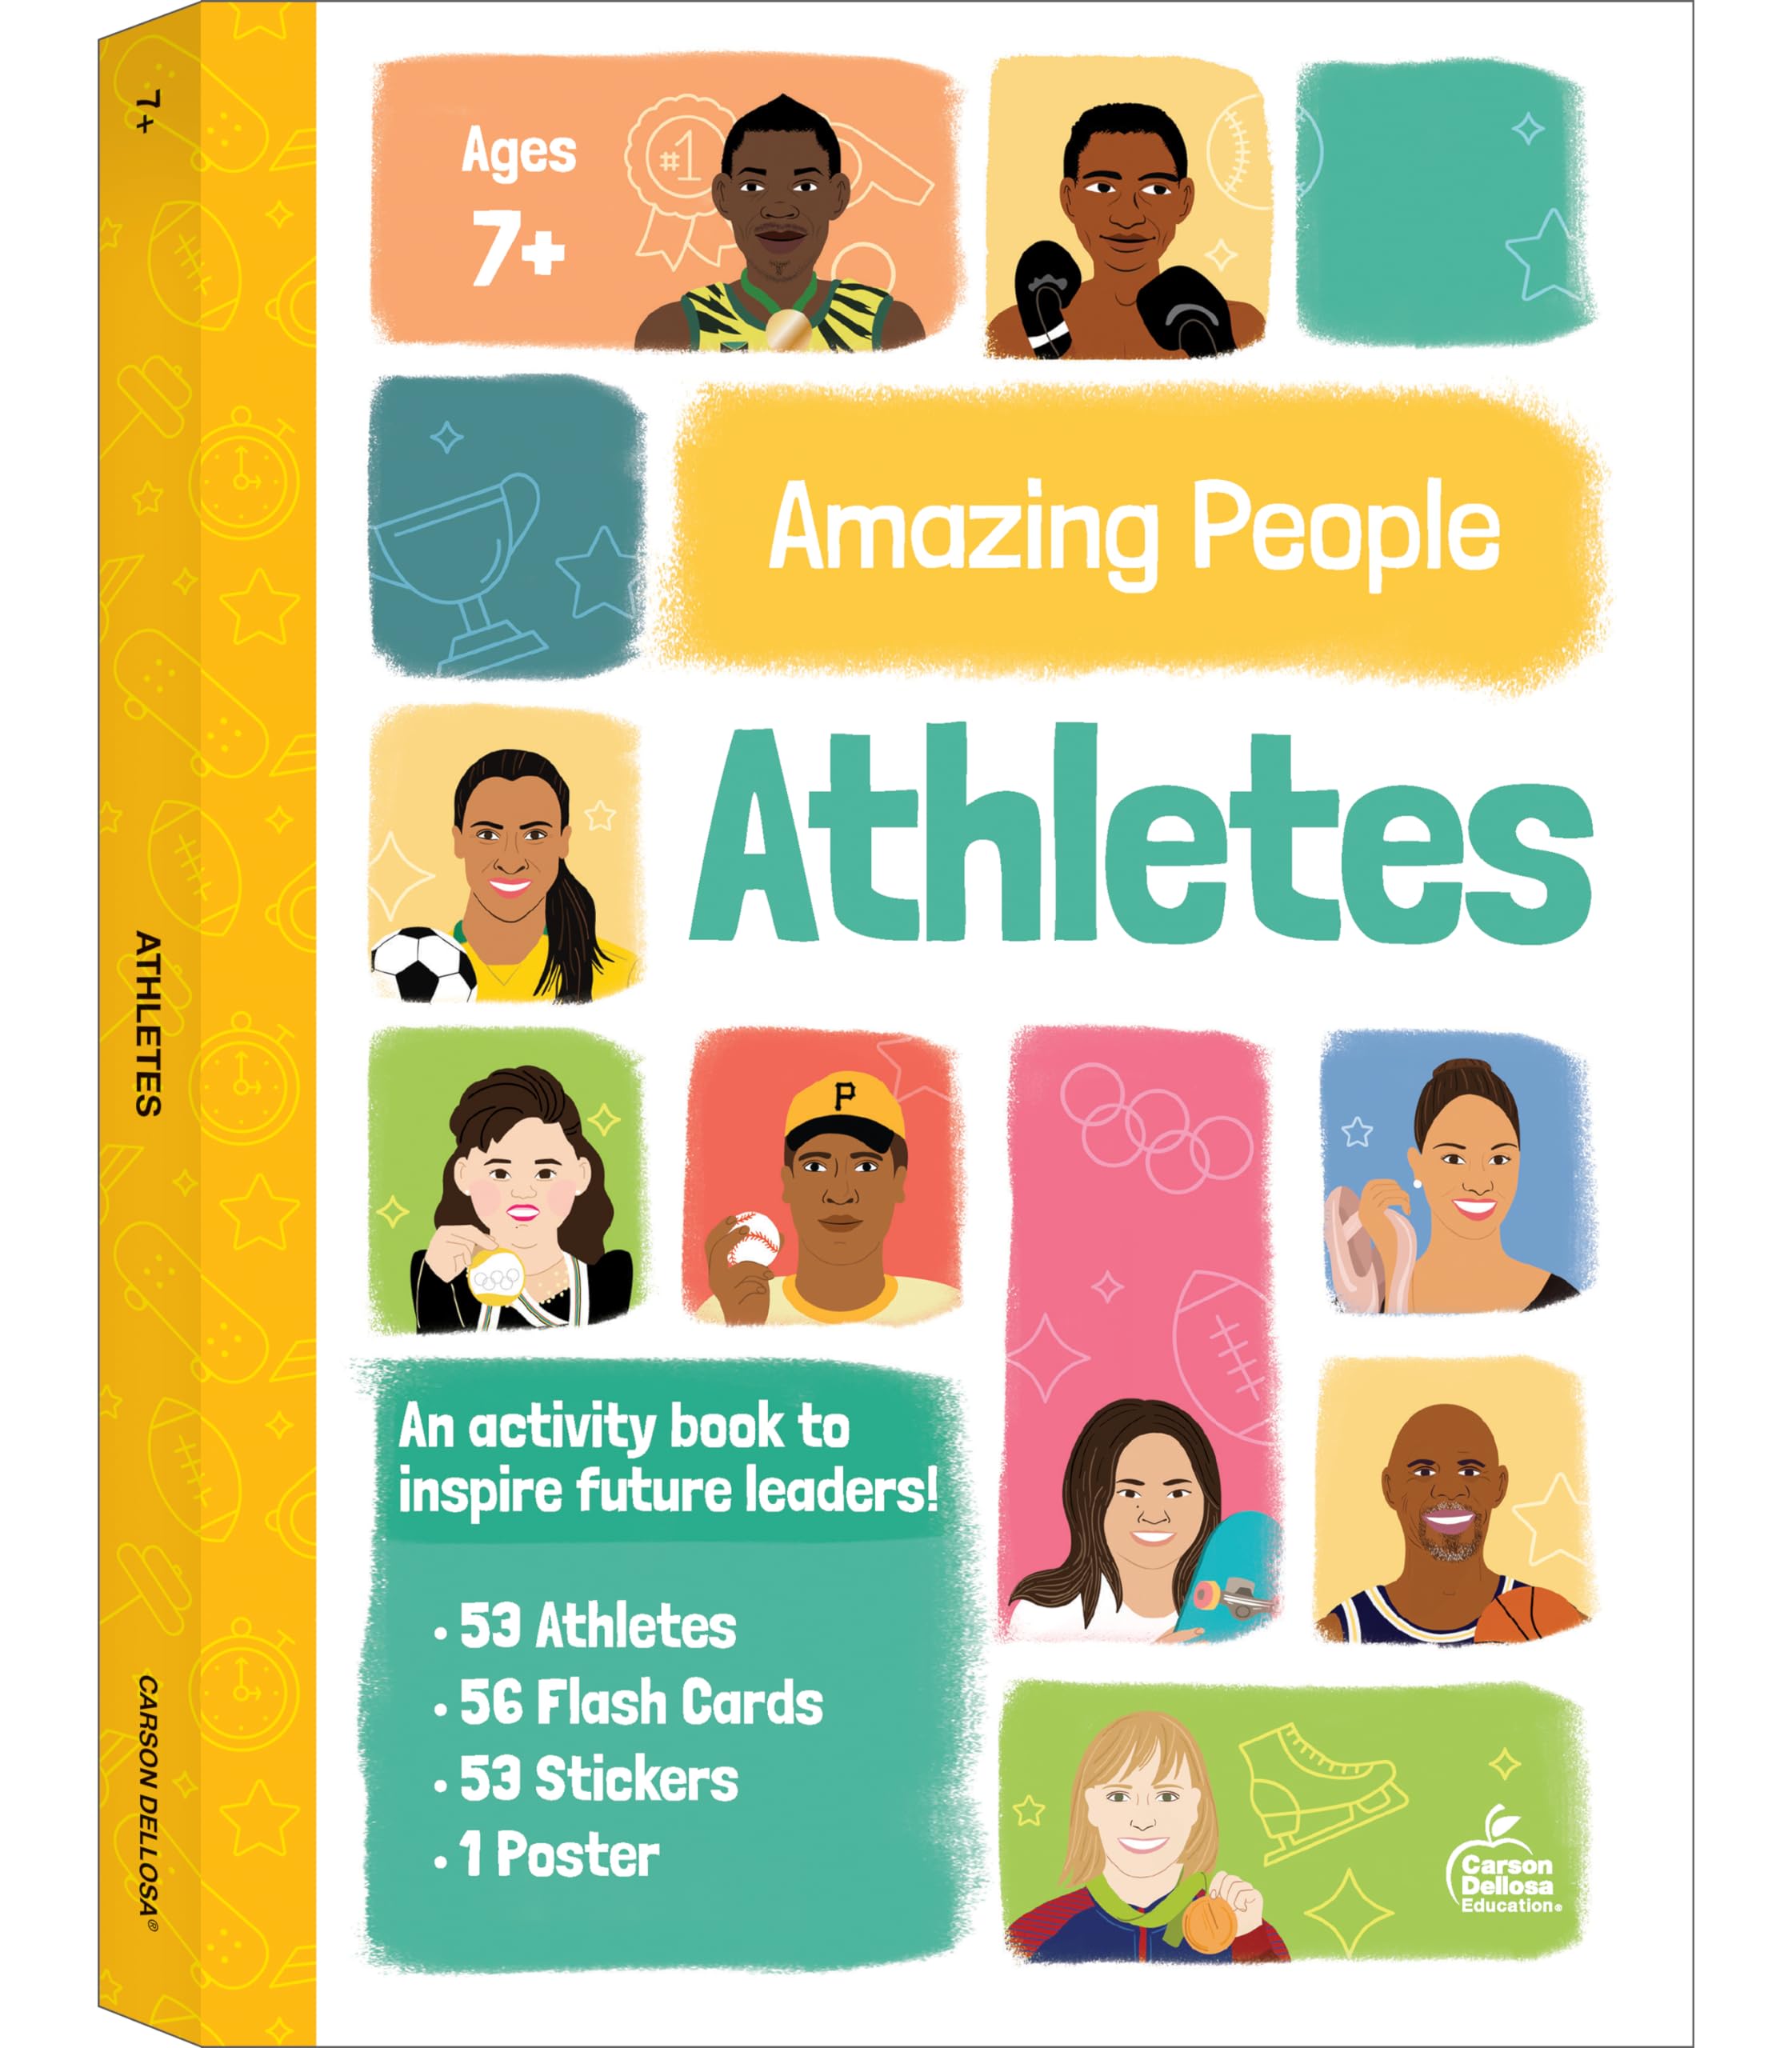 Amazing People: Athletes Activity Book, 1st Grade, 2nd Grade, 3rd Grade Workbooks With Flash Cards, Puzzles, Games, Motivational Poster, and Stickers, Activity Books for Grade 1 +